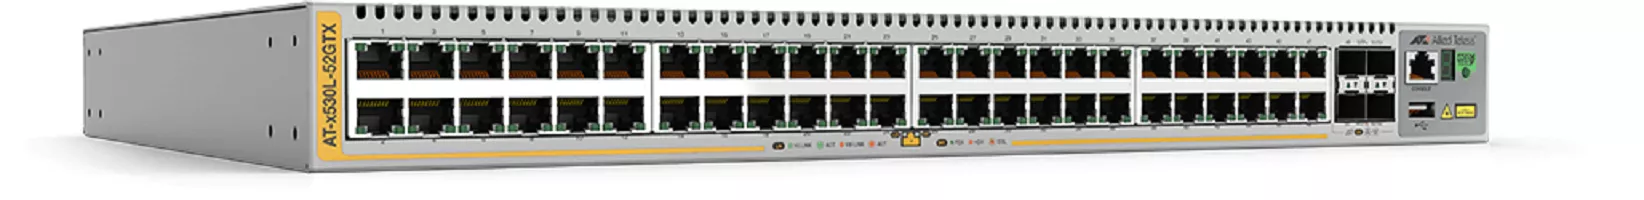 Achat ALLIED 48-port 10/100/1000T stackable switch 4 SFP+ ports 2 - 0767035217048